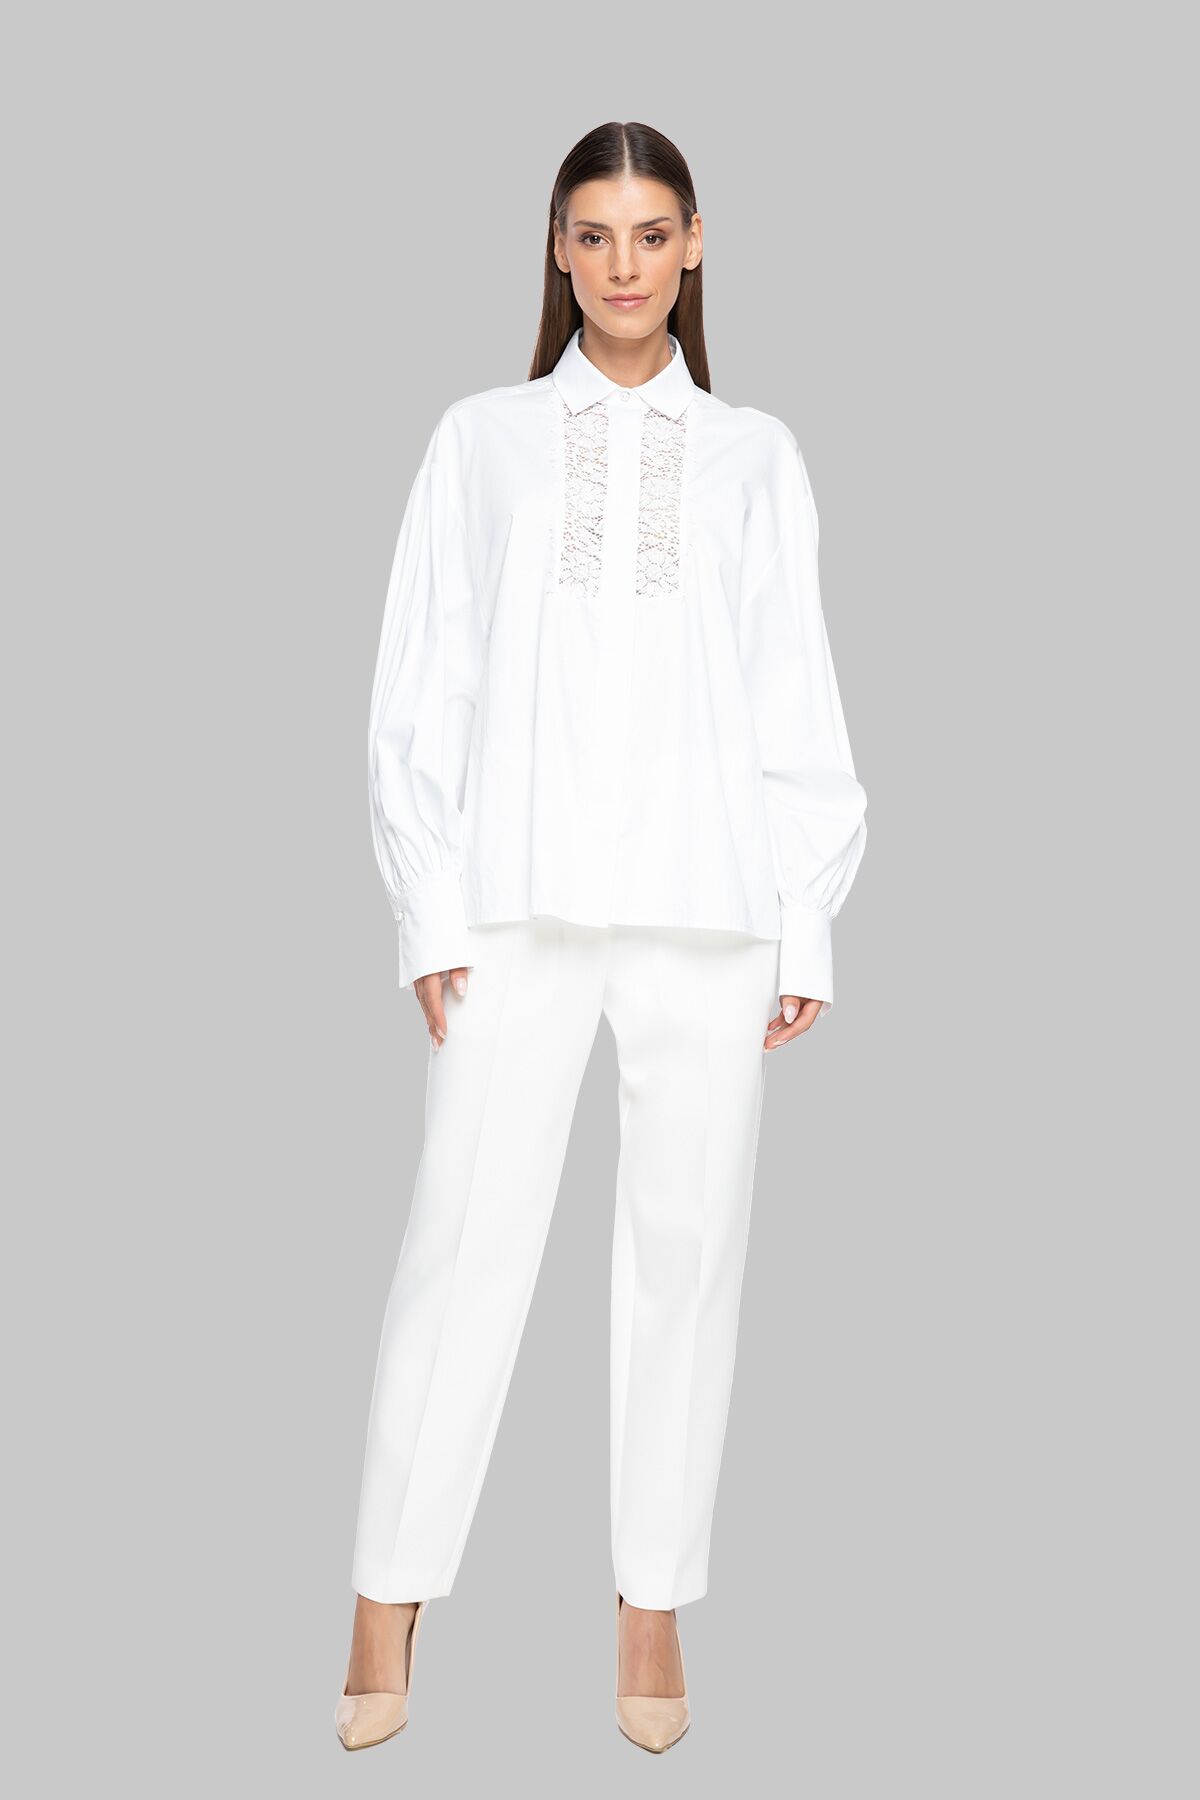  GIZIA - Lace And Embroidered Detailed Voluminous Sleeve White Poplin Shirt